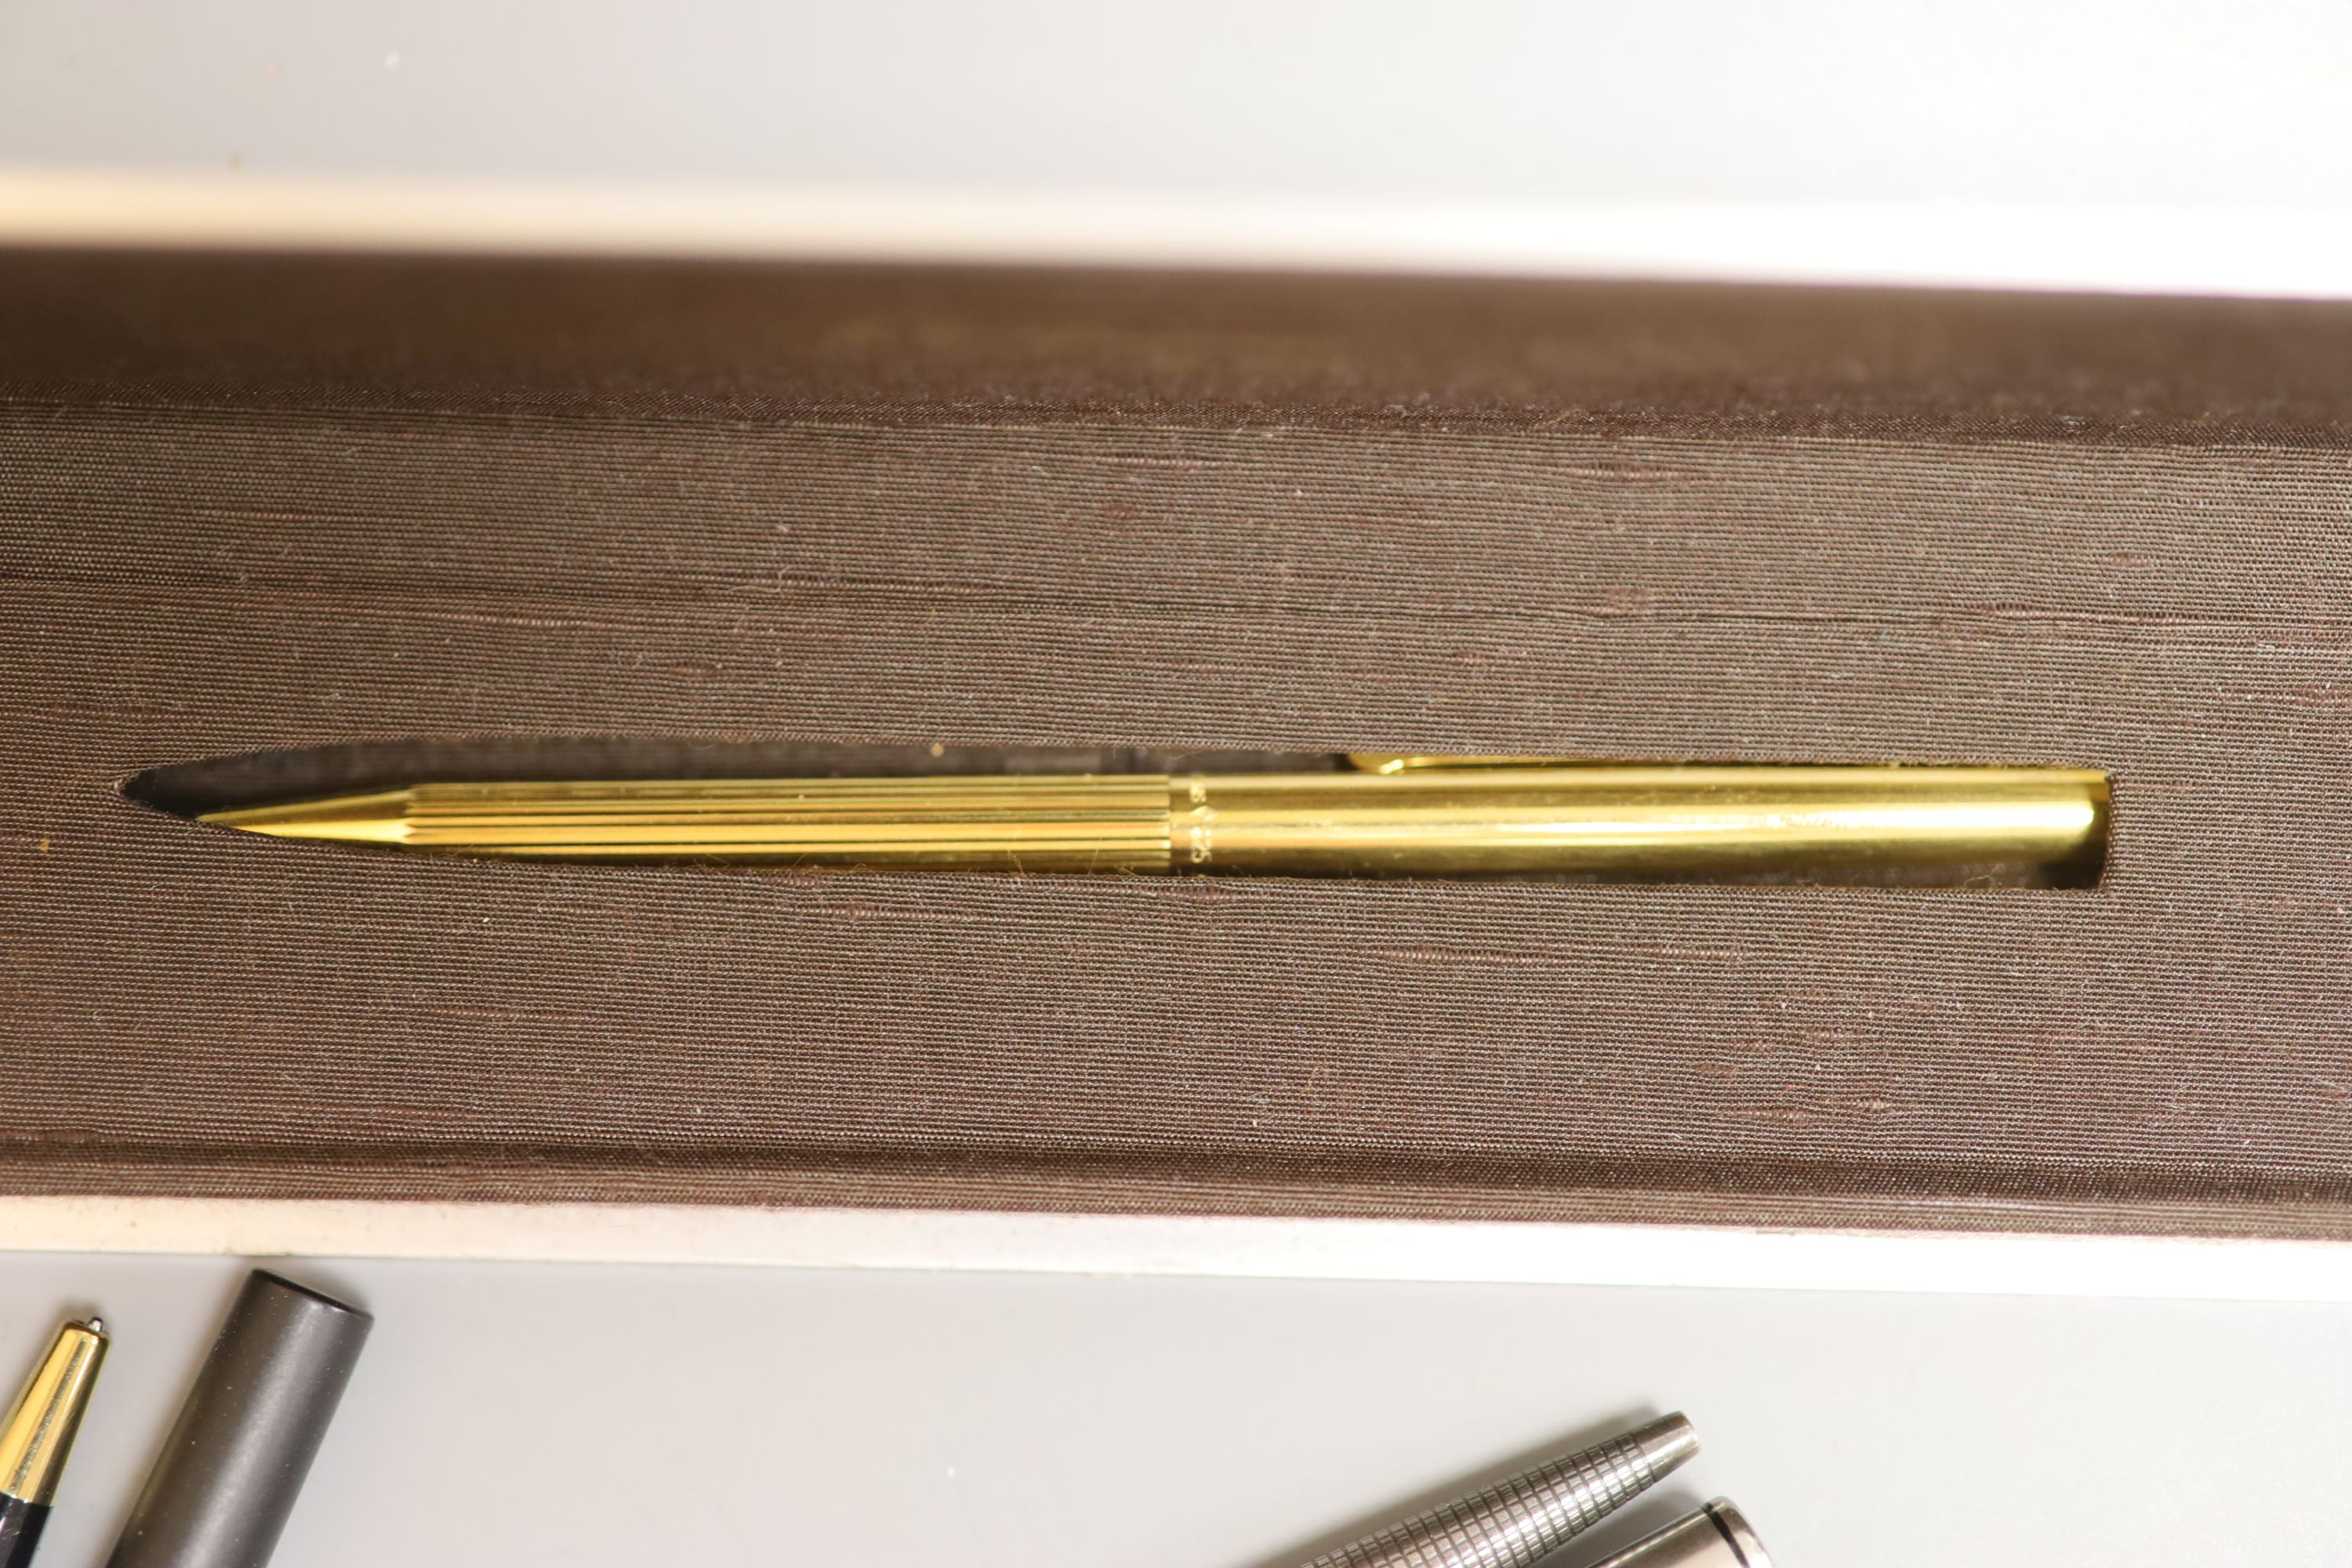 A Dupont Vermeil and blue lacquer ball pen and other pens